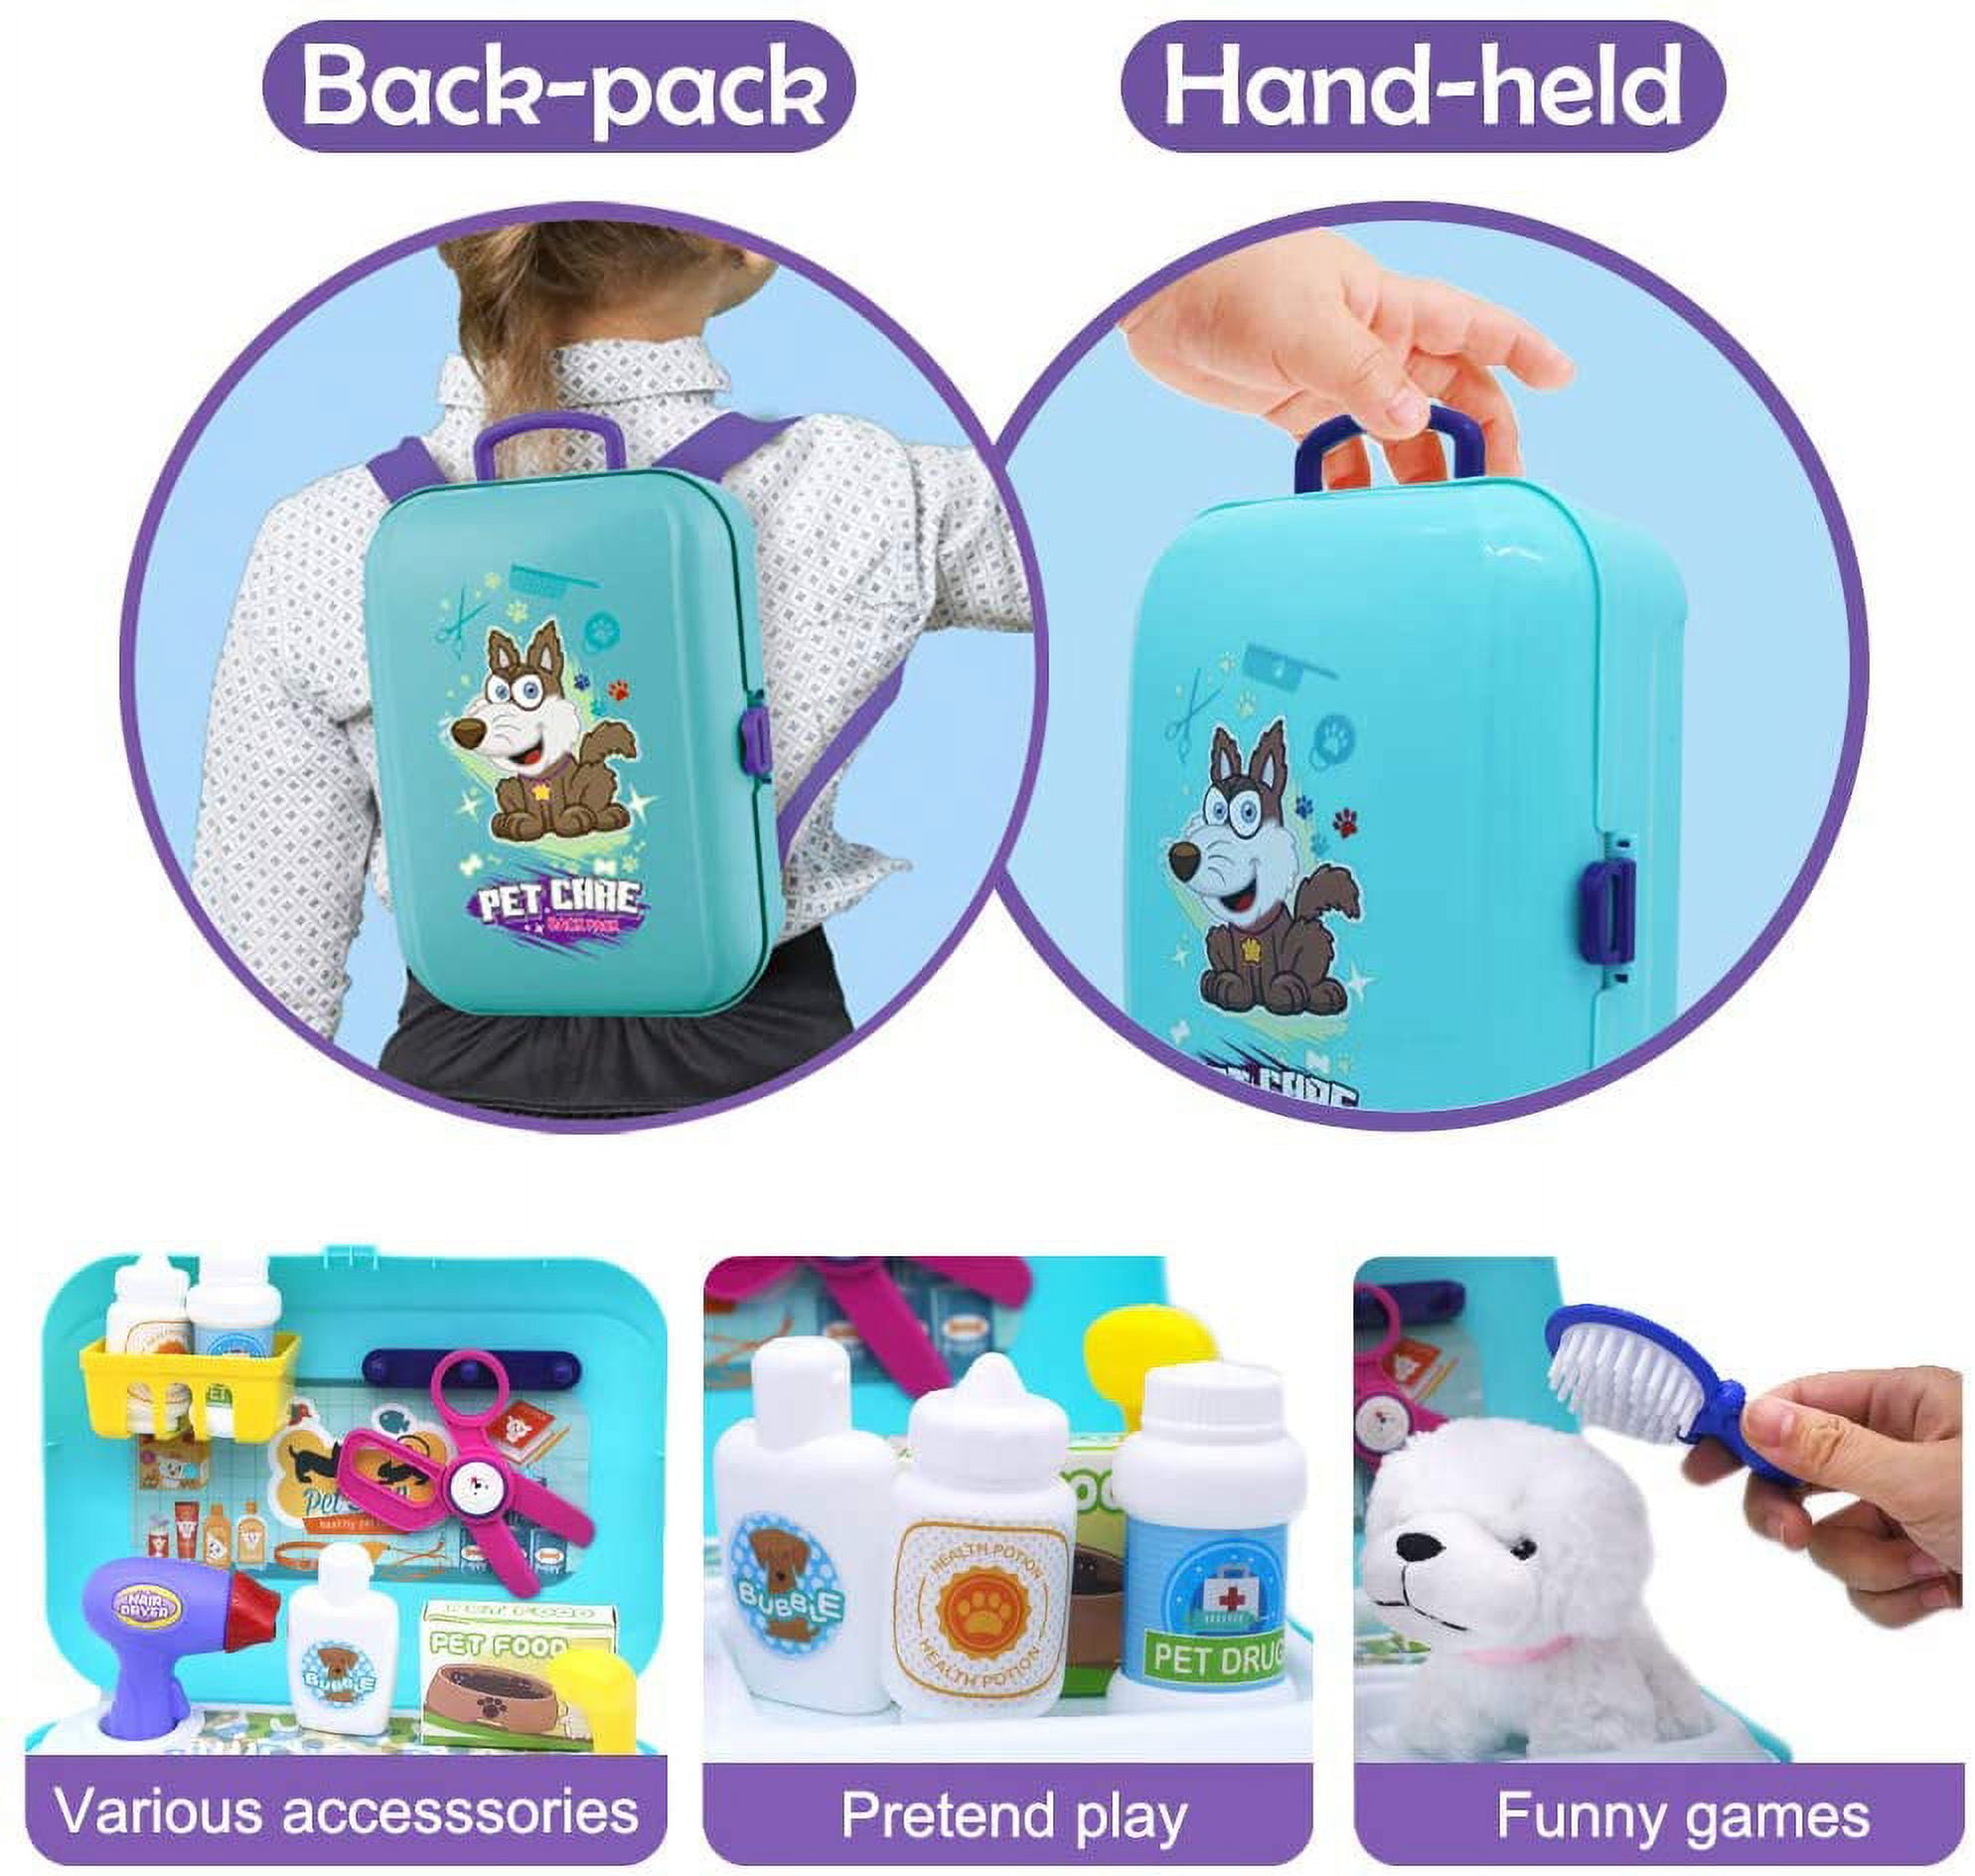 Sotodik Pet Care Play Set Electric Vet Play Set-Walking,Barking,Tail  Wagging Little Plush Dog Grooming Toys with Puppy Carrier Feeding Dog  Educational